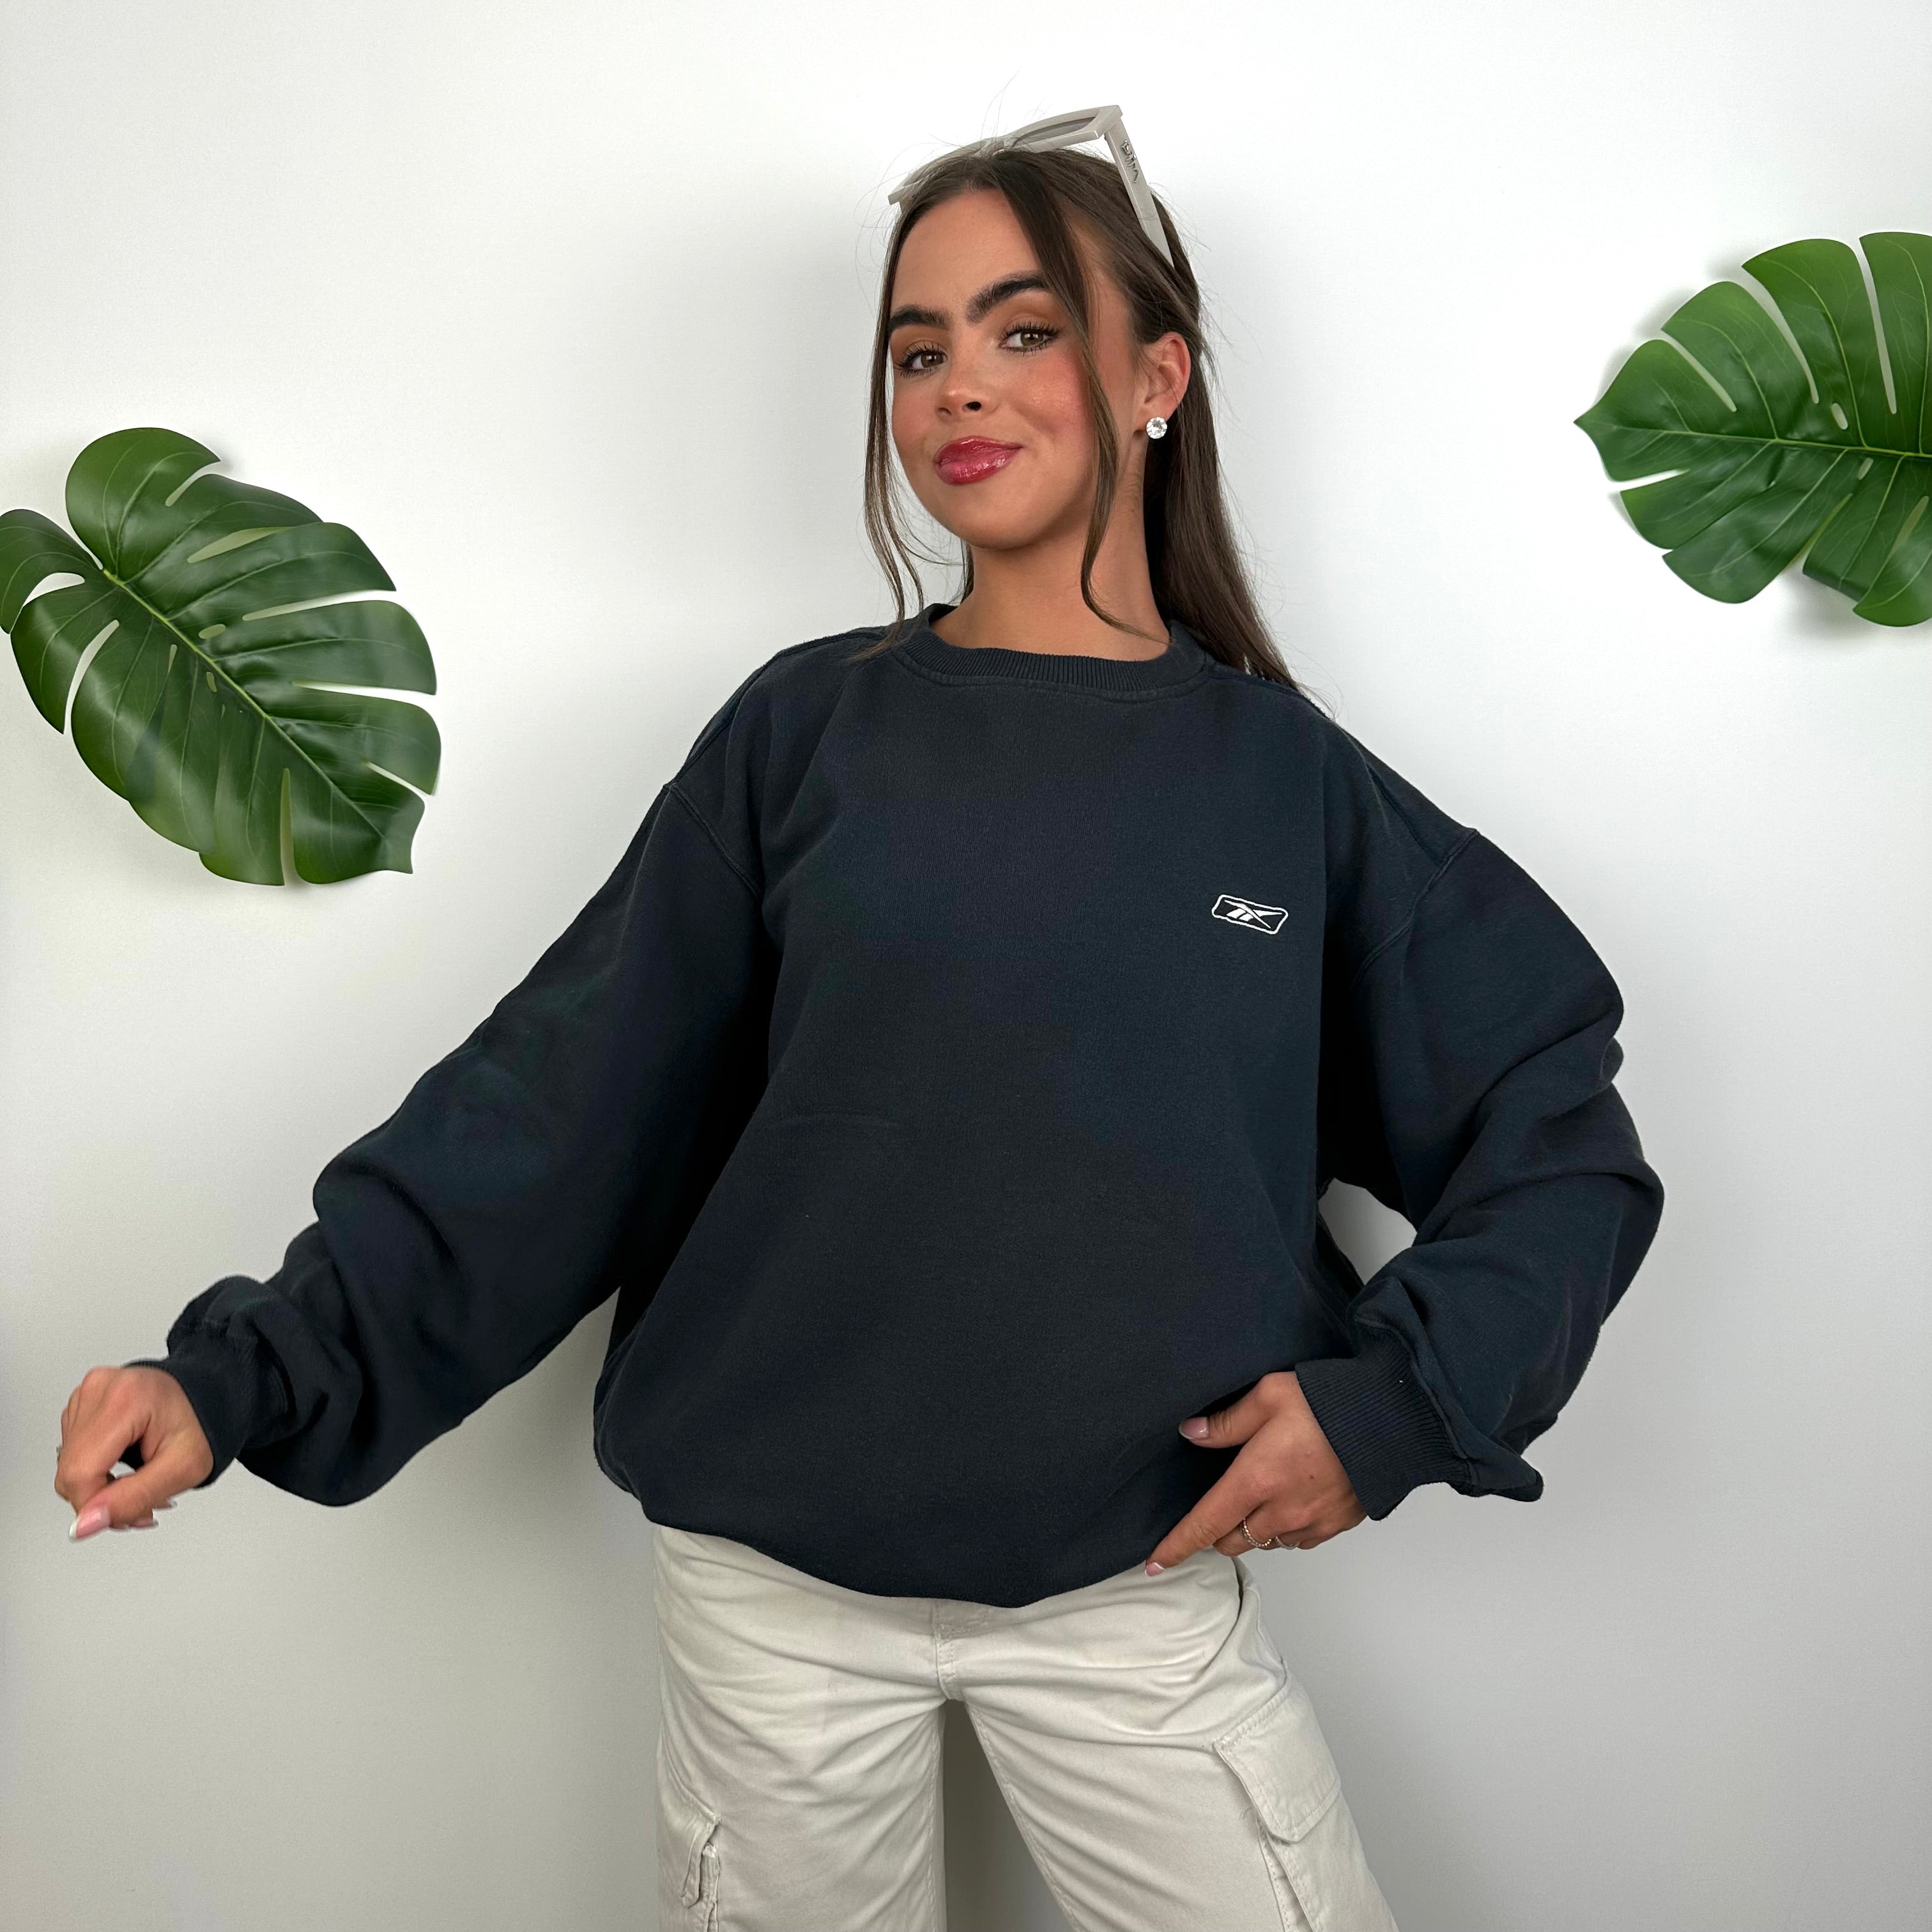 Reebok Navy Embroidered Spell Out Sweatshirt (L)